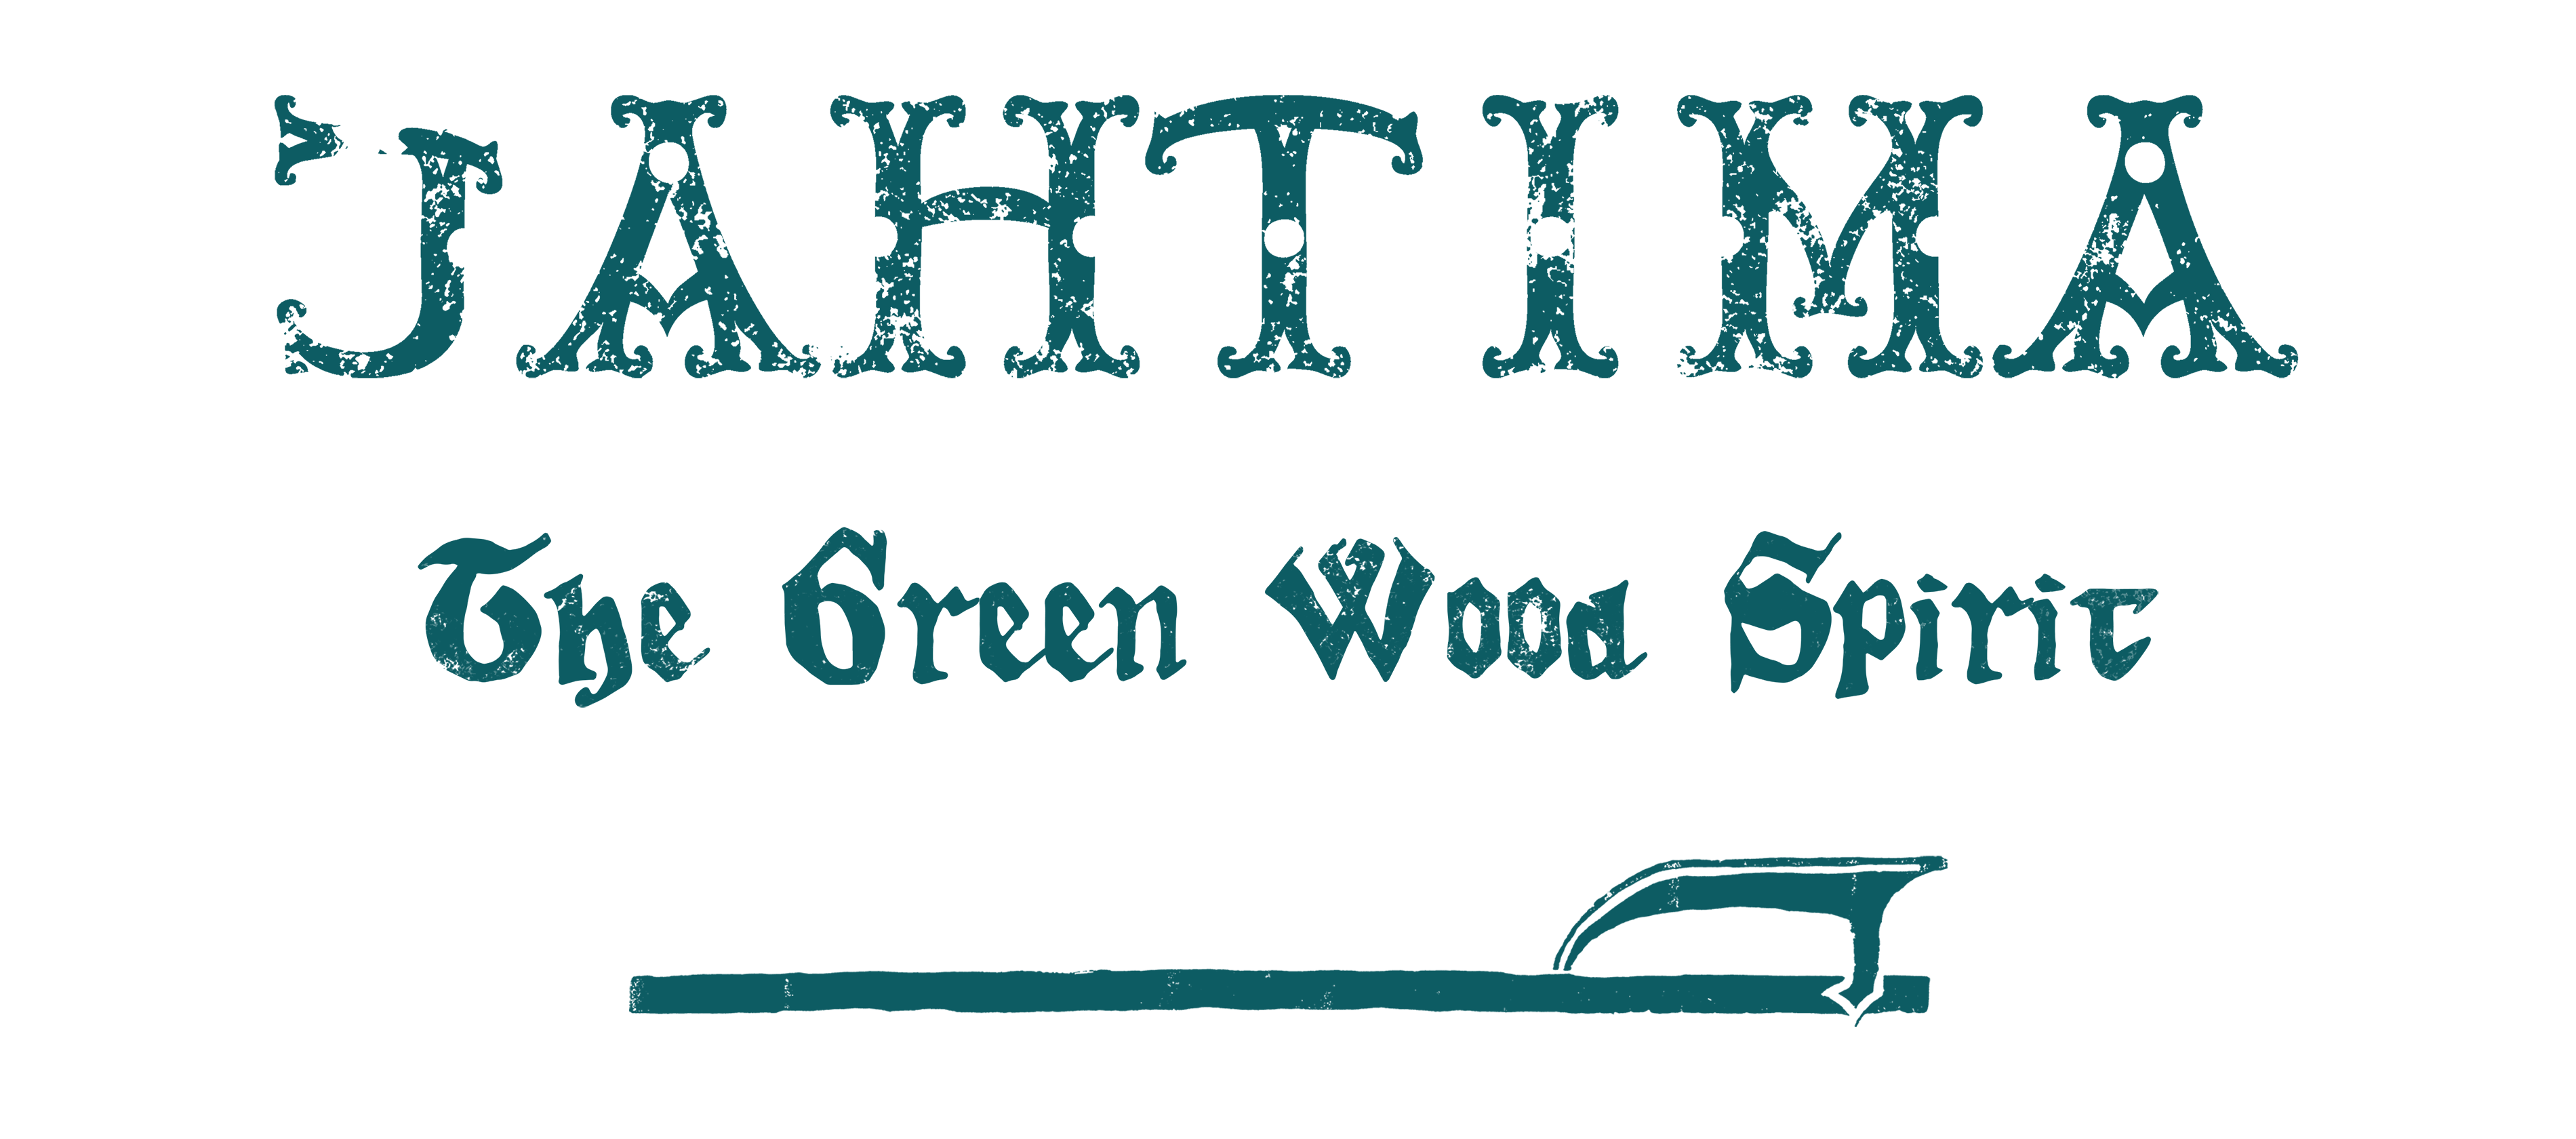 The Green Wood Spirit - A Tale for Jahtima TTRPG